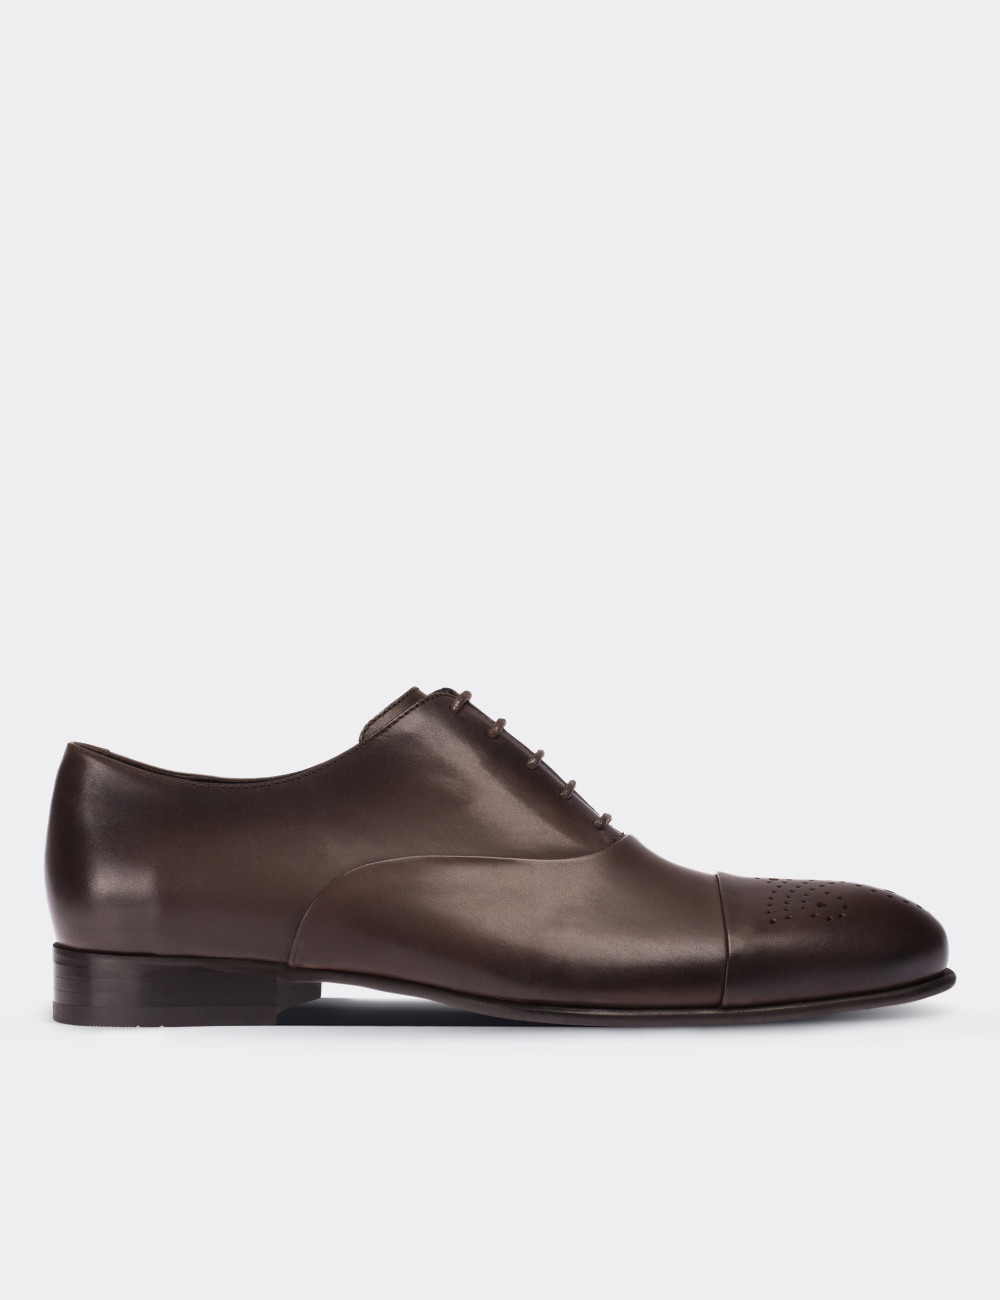 Sandstone  Leather Classic Shoes - 01653MVZNM01